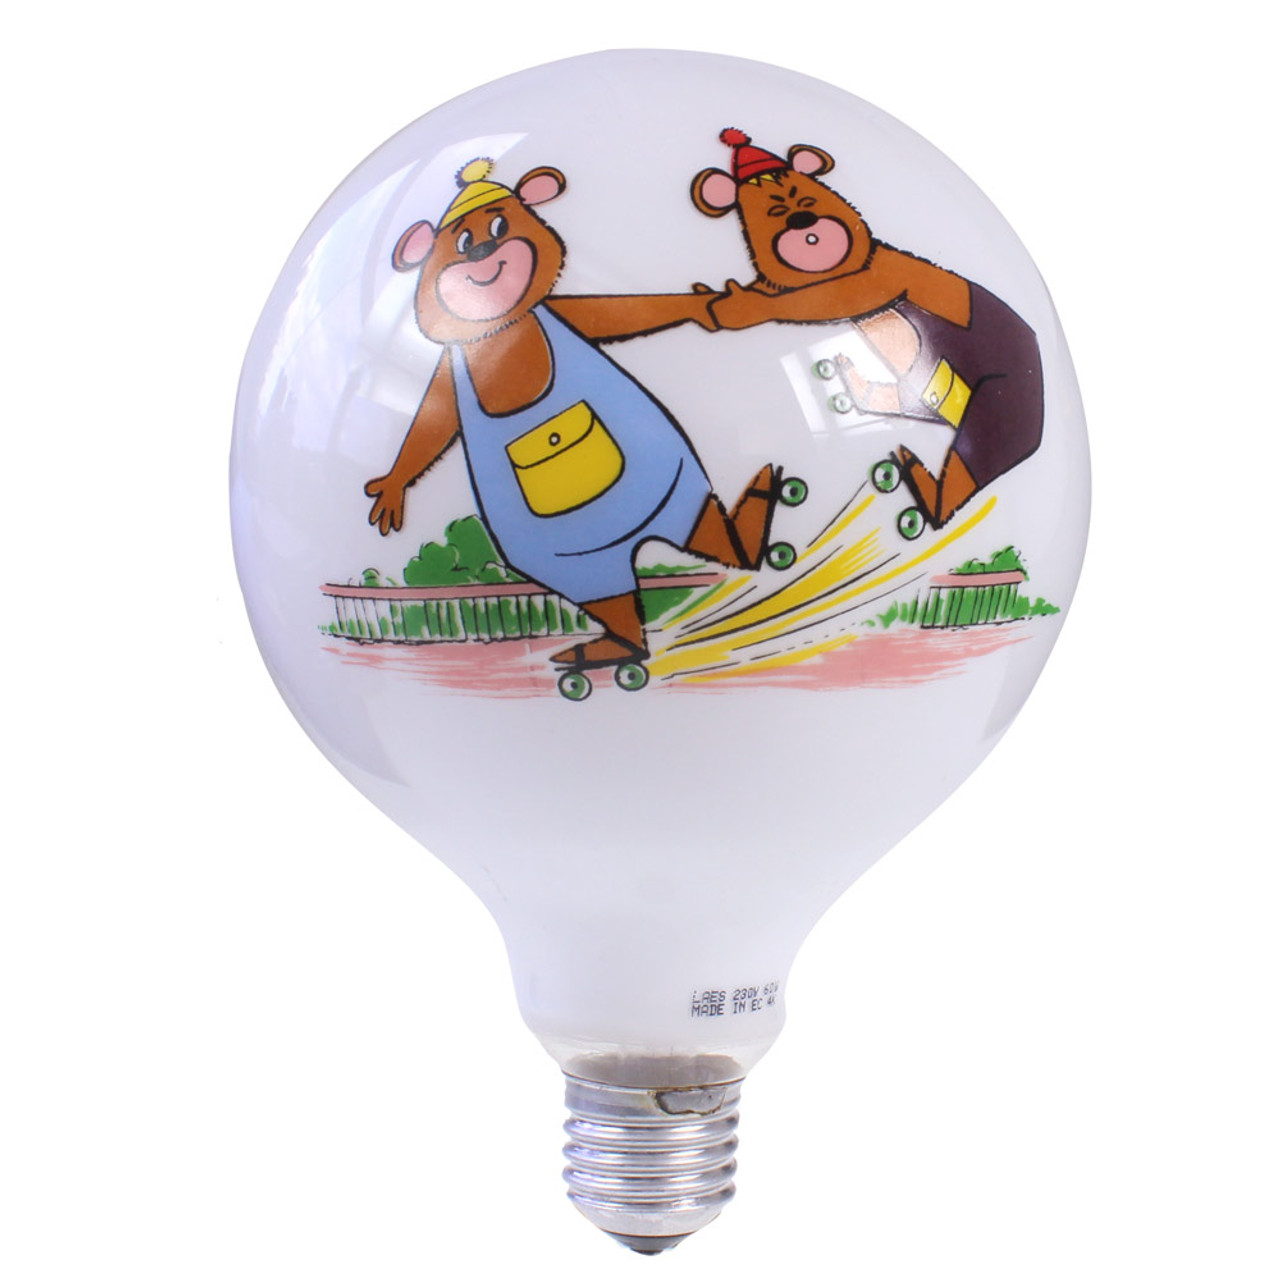 125mm Round Childrens Table Lamp E27